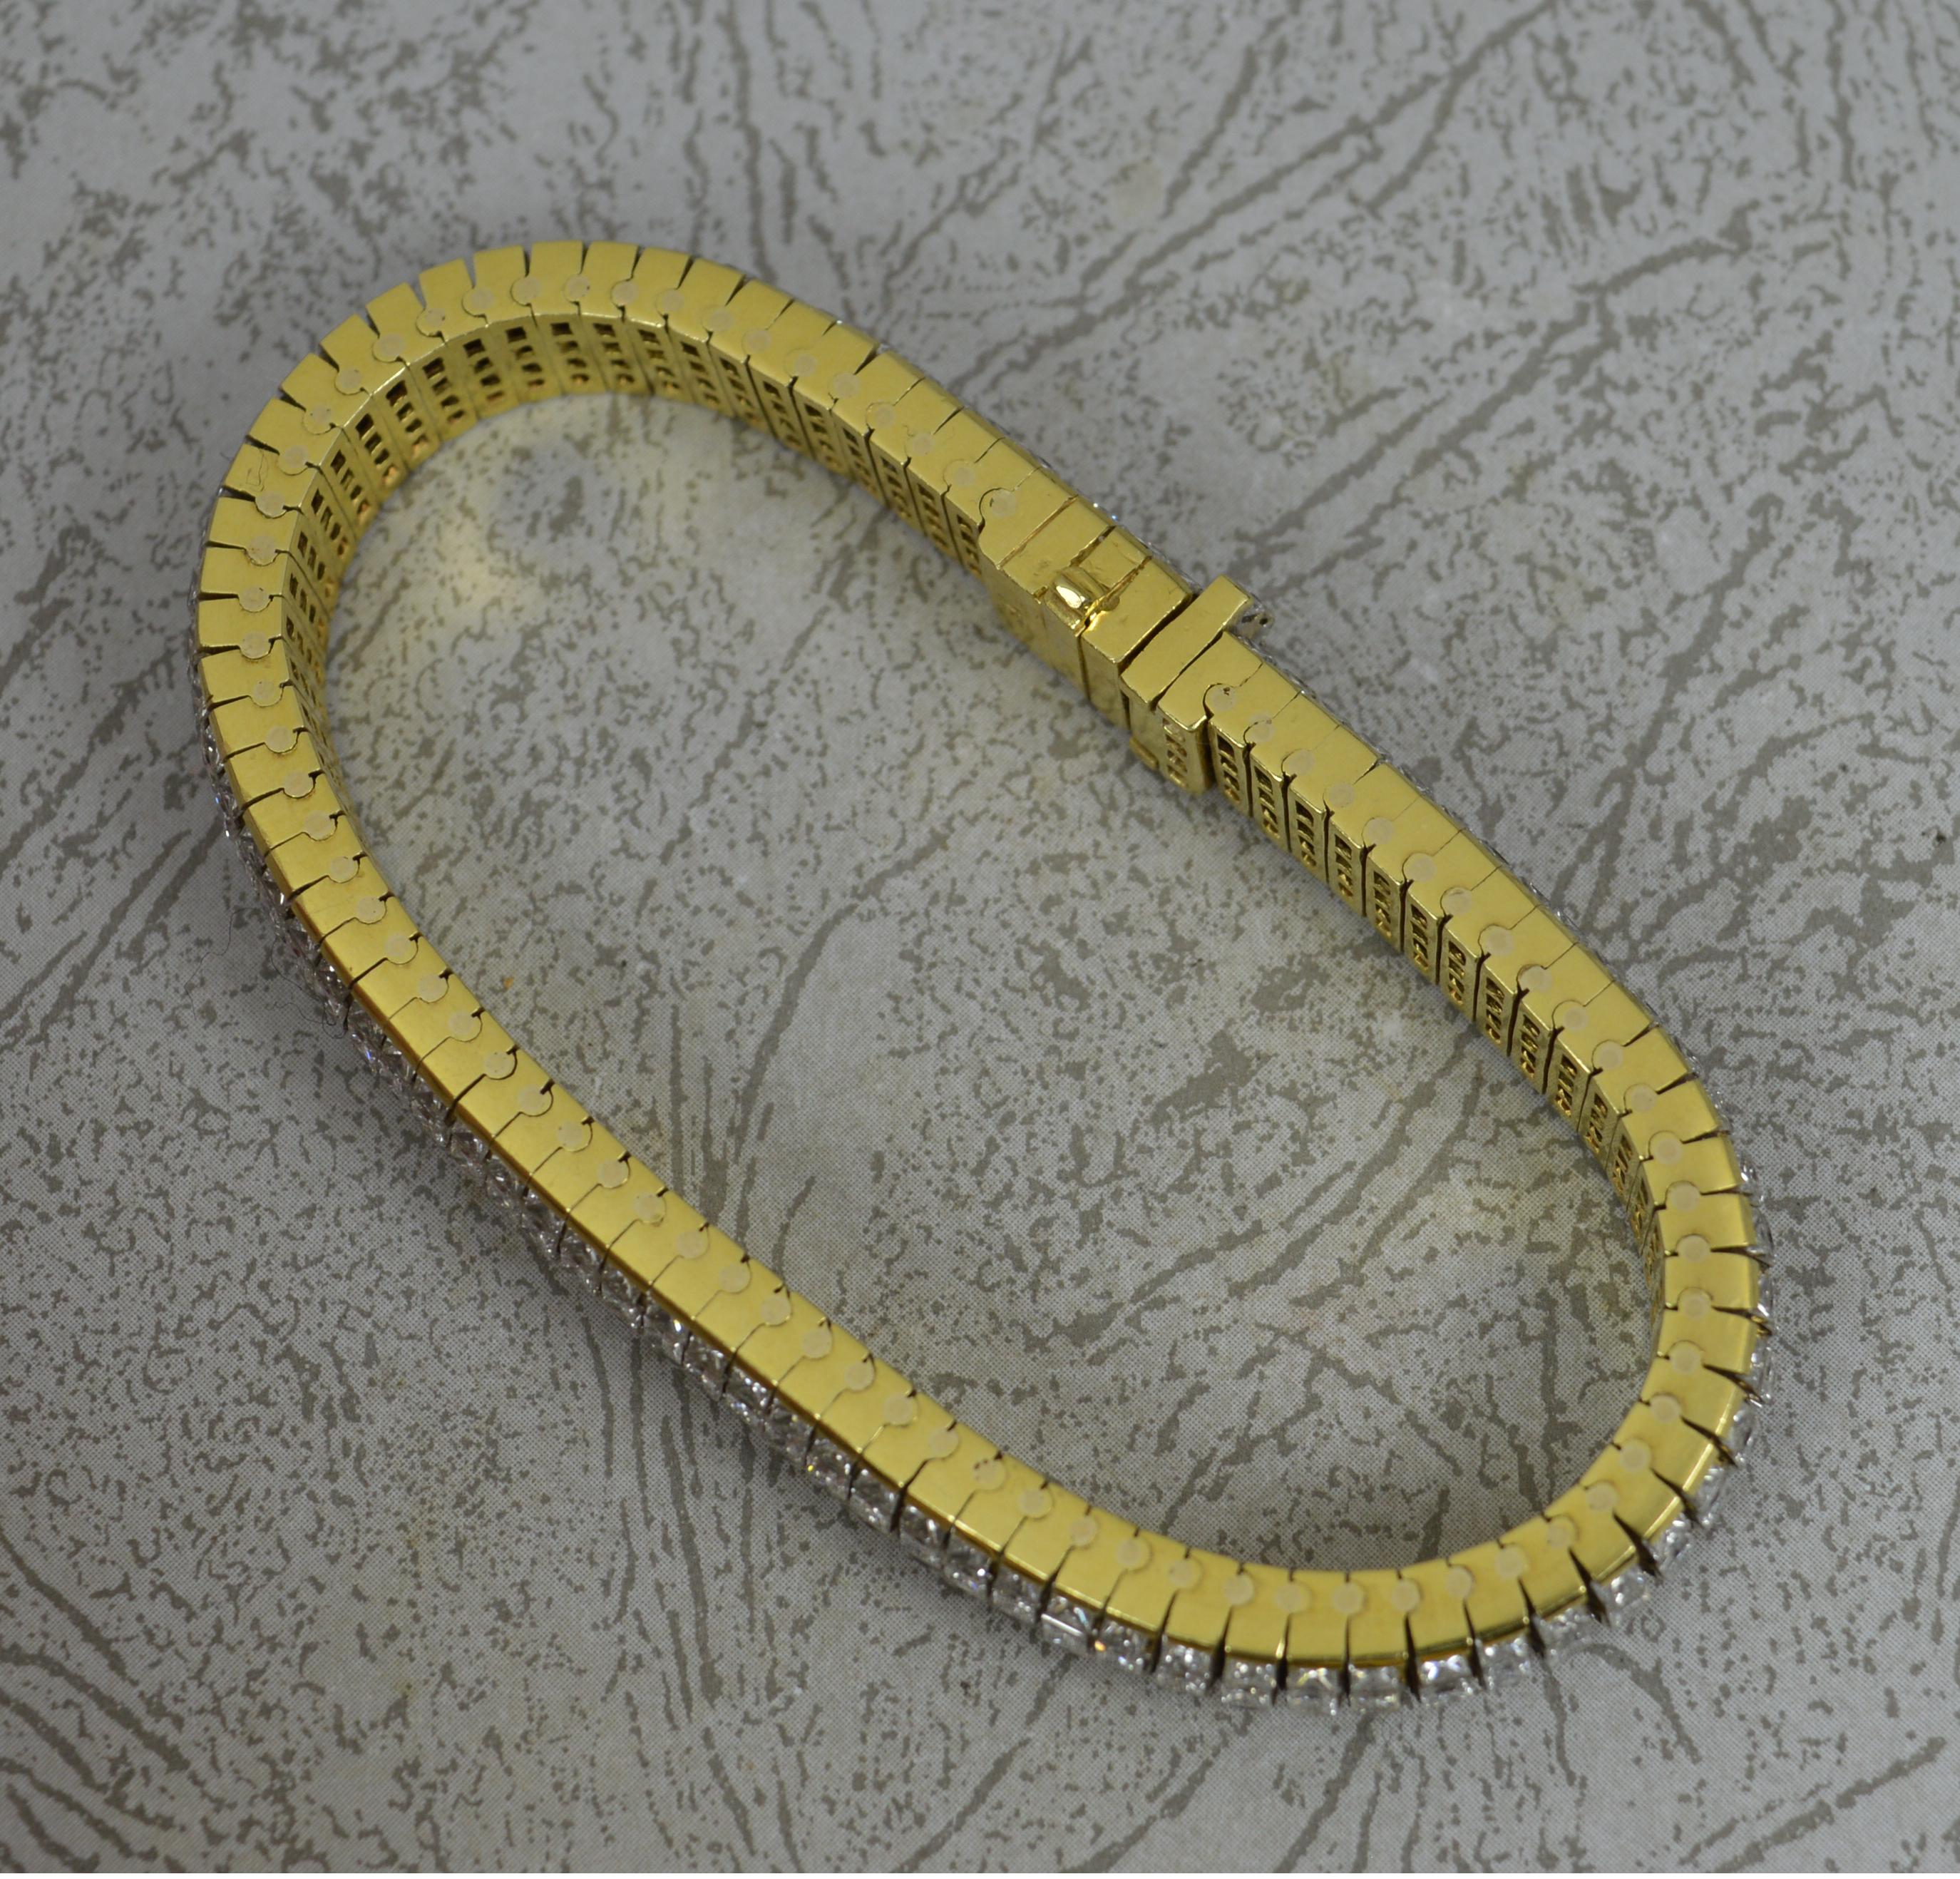 A stunning diamond and gold bracelet.
Very heavy and solid 18 carat yellow gold example. Almost 60 grams.
Set with a significant number of natural, untreated, princess cut diamonds throughout the 7 inch length. A total of 16 full carats. Very clean,